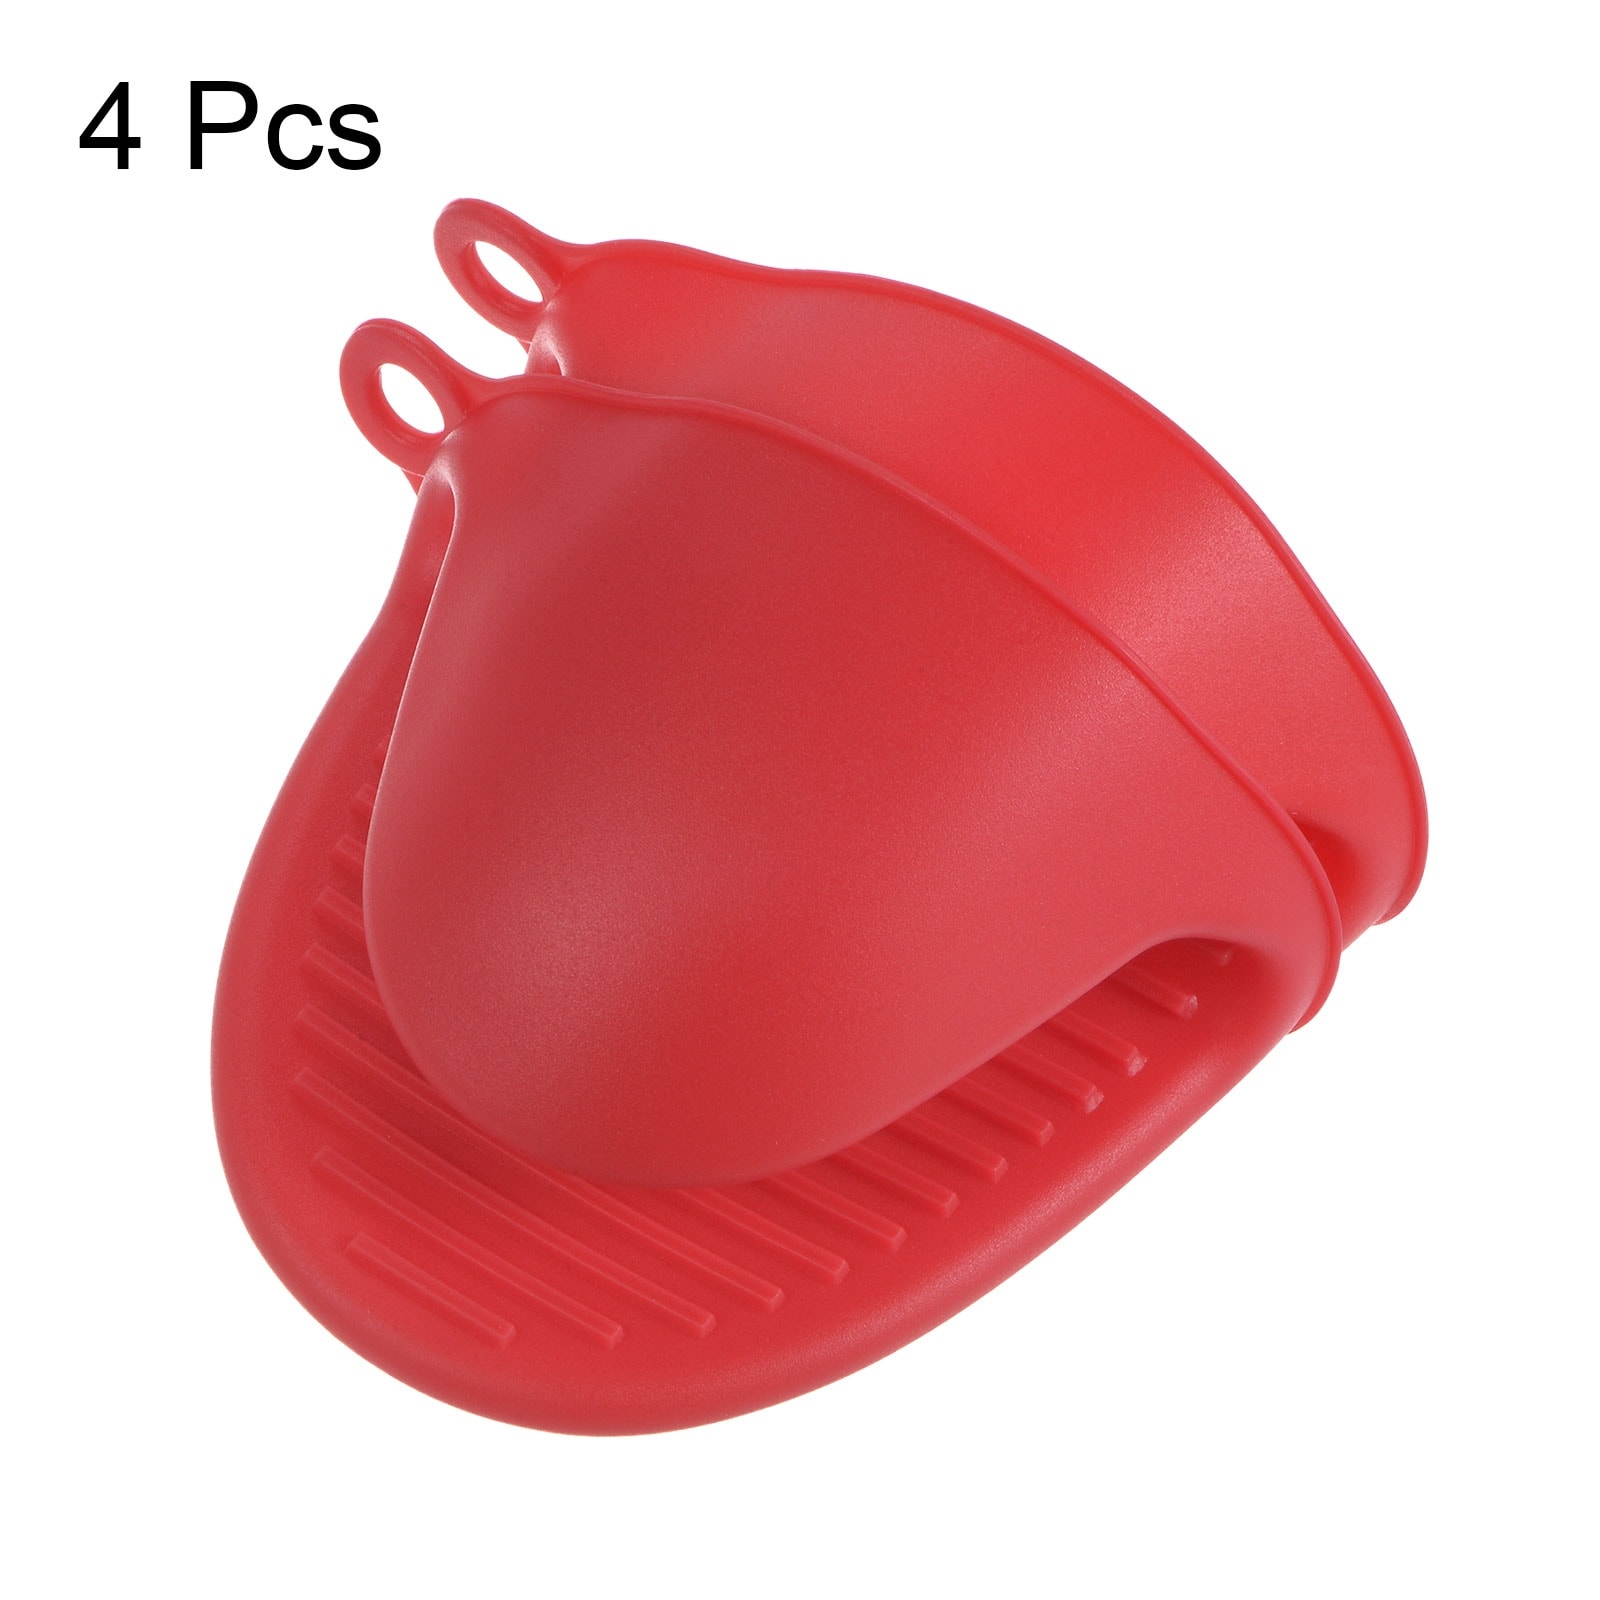 https://ak1.ostkcdn.com/images/products/is/images/direct/db36adb41ae1f602965792429cbc8b0e98ac8ffb/4pcs-Silicone-Pot-Holders-Pinch-Grips-Oven-Mitts-Mini-Oven-Mitts.jpg